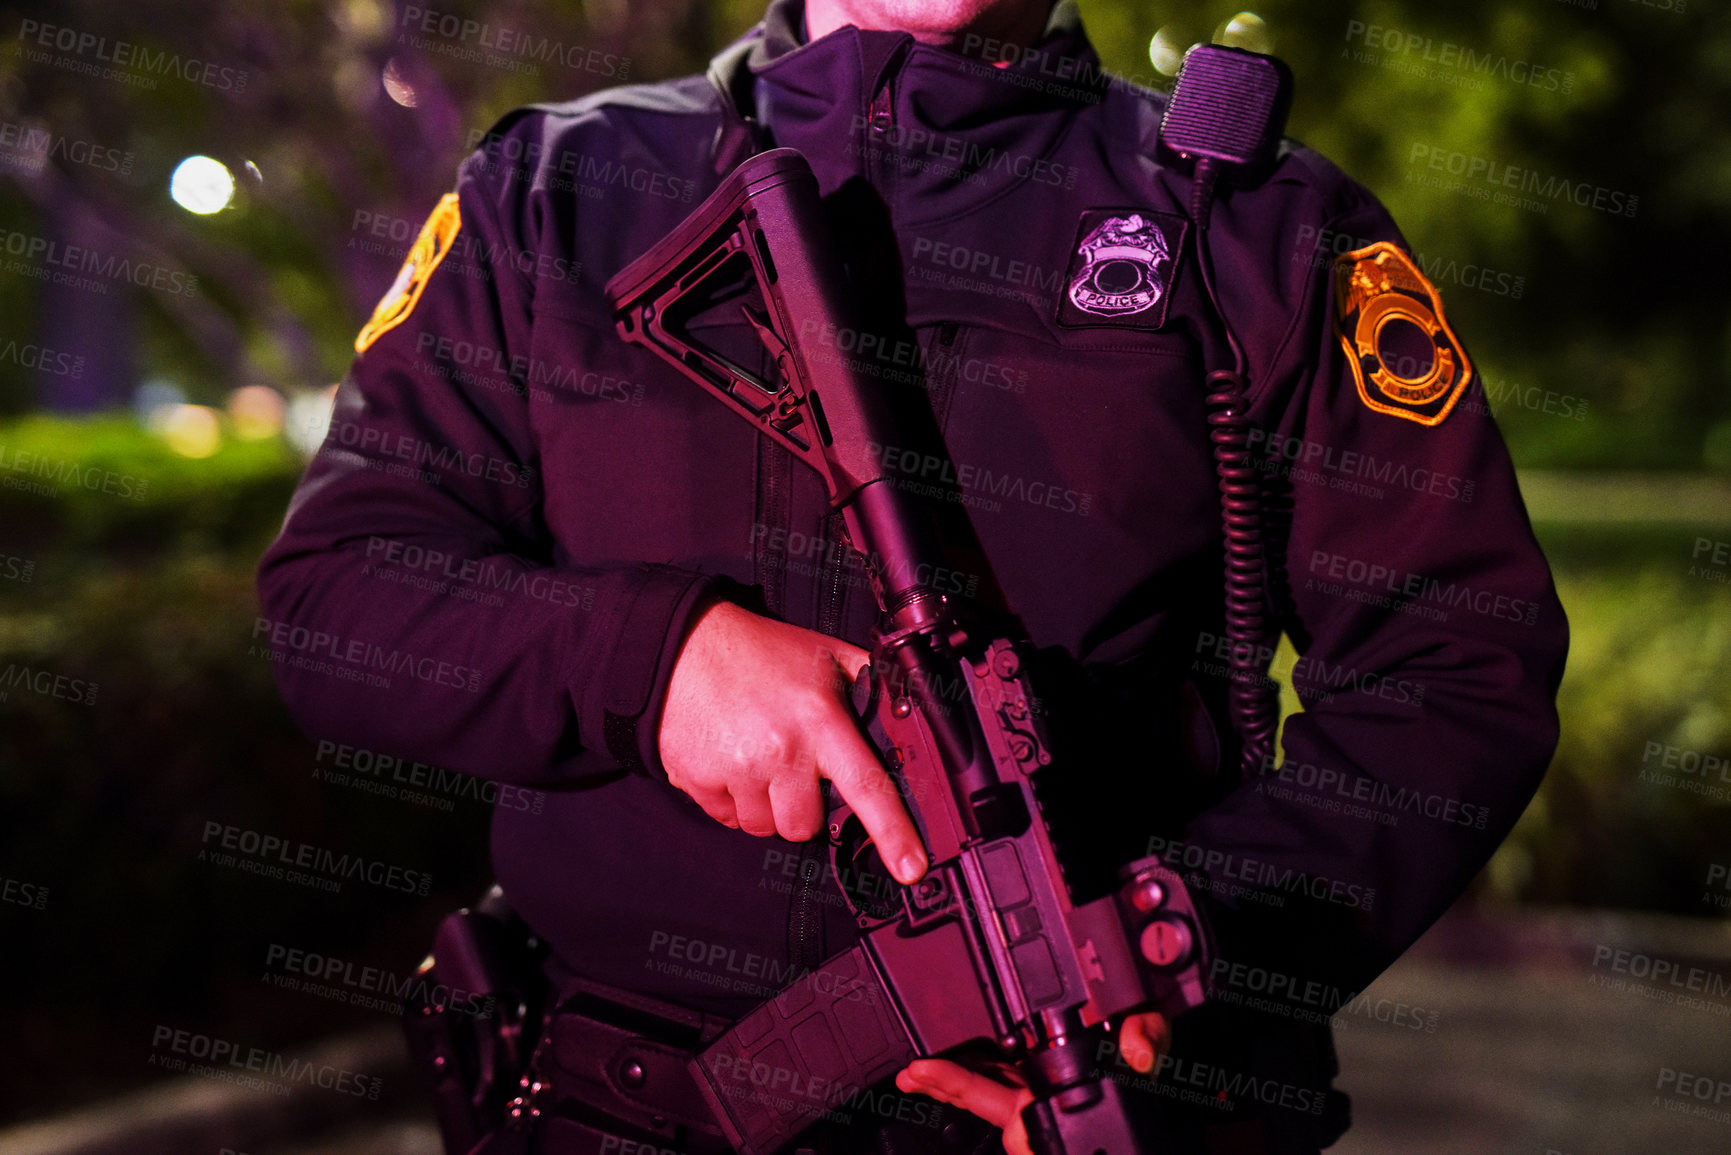 Buy stock photo Cropped shot of an unrecognizable policeman standing with his assault rifle while out on patrol